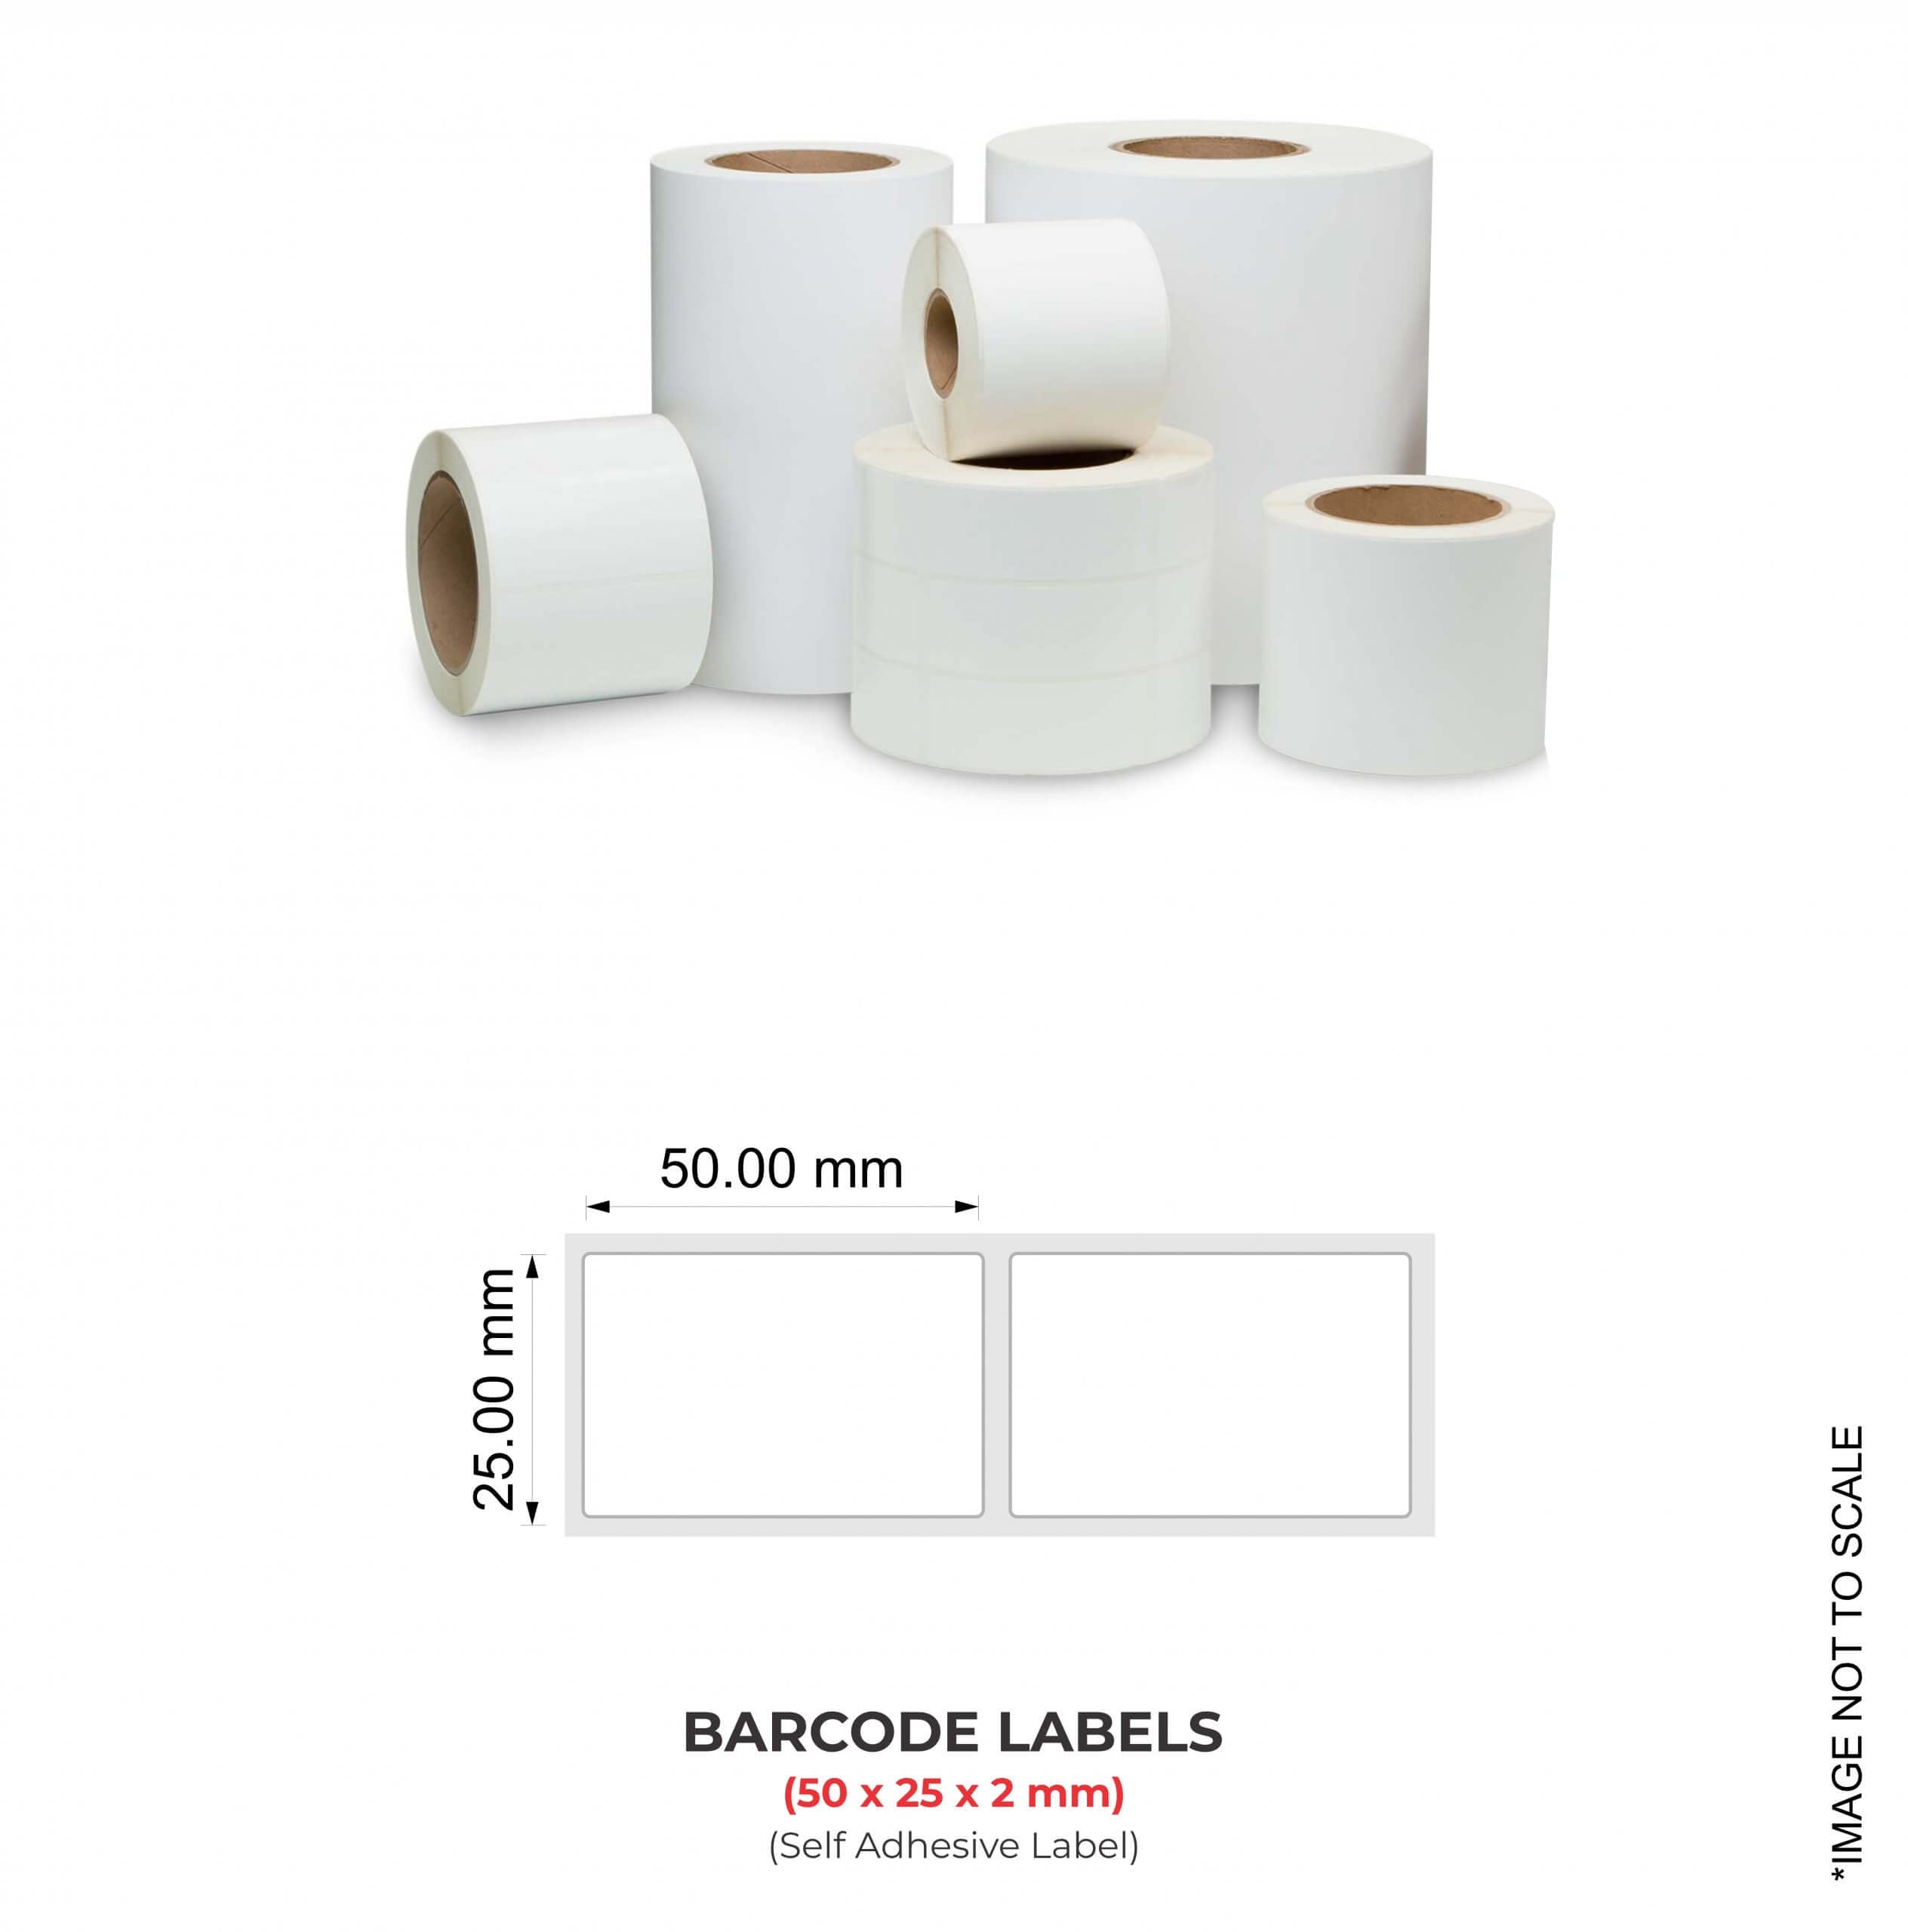 Barcode Labels (50mm x 25mm x 2) (2" x 1"), 4000 Labels Per Roll (Self Adhesive Label)